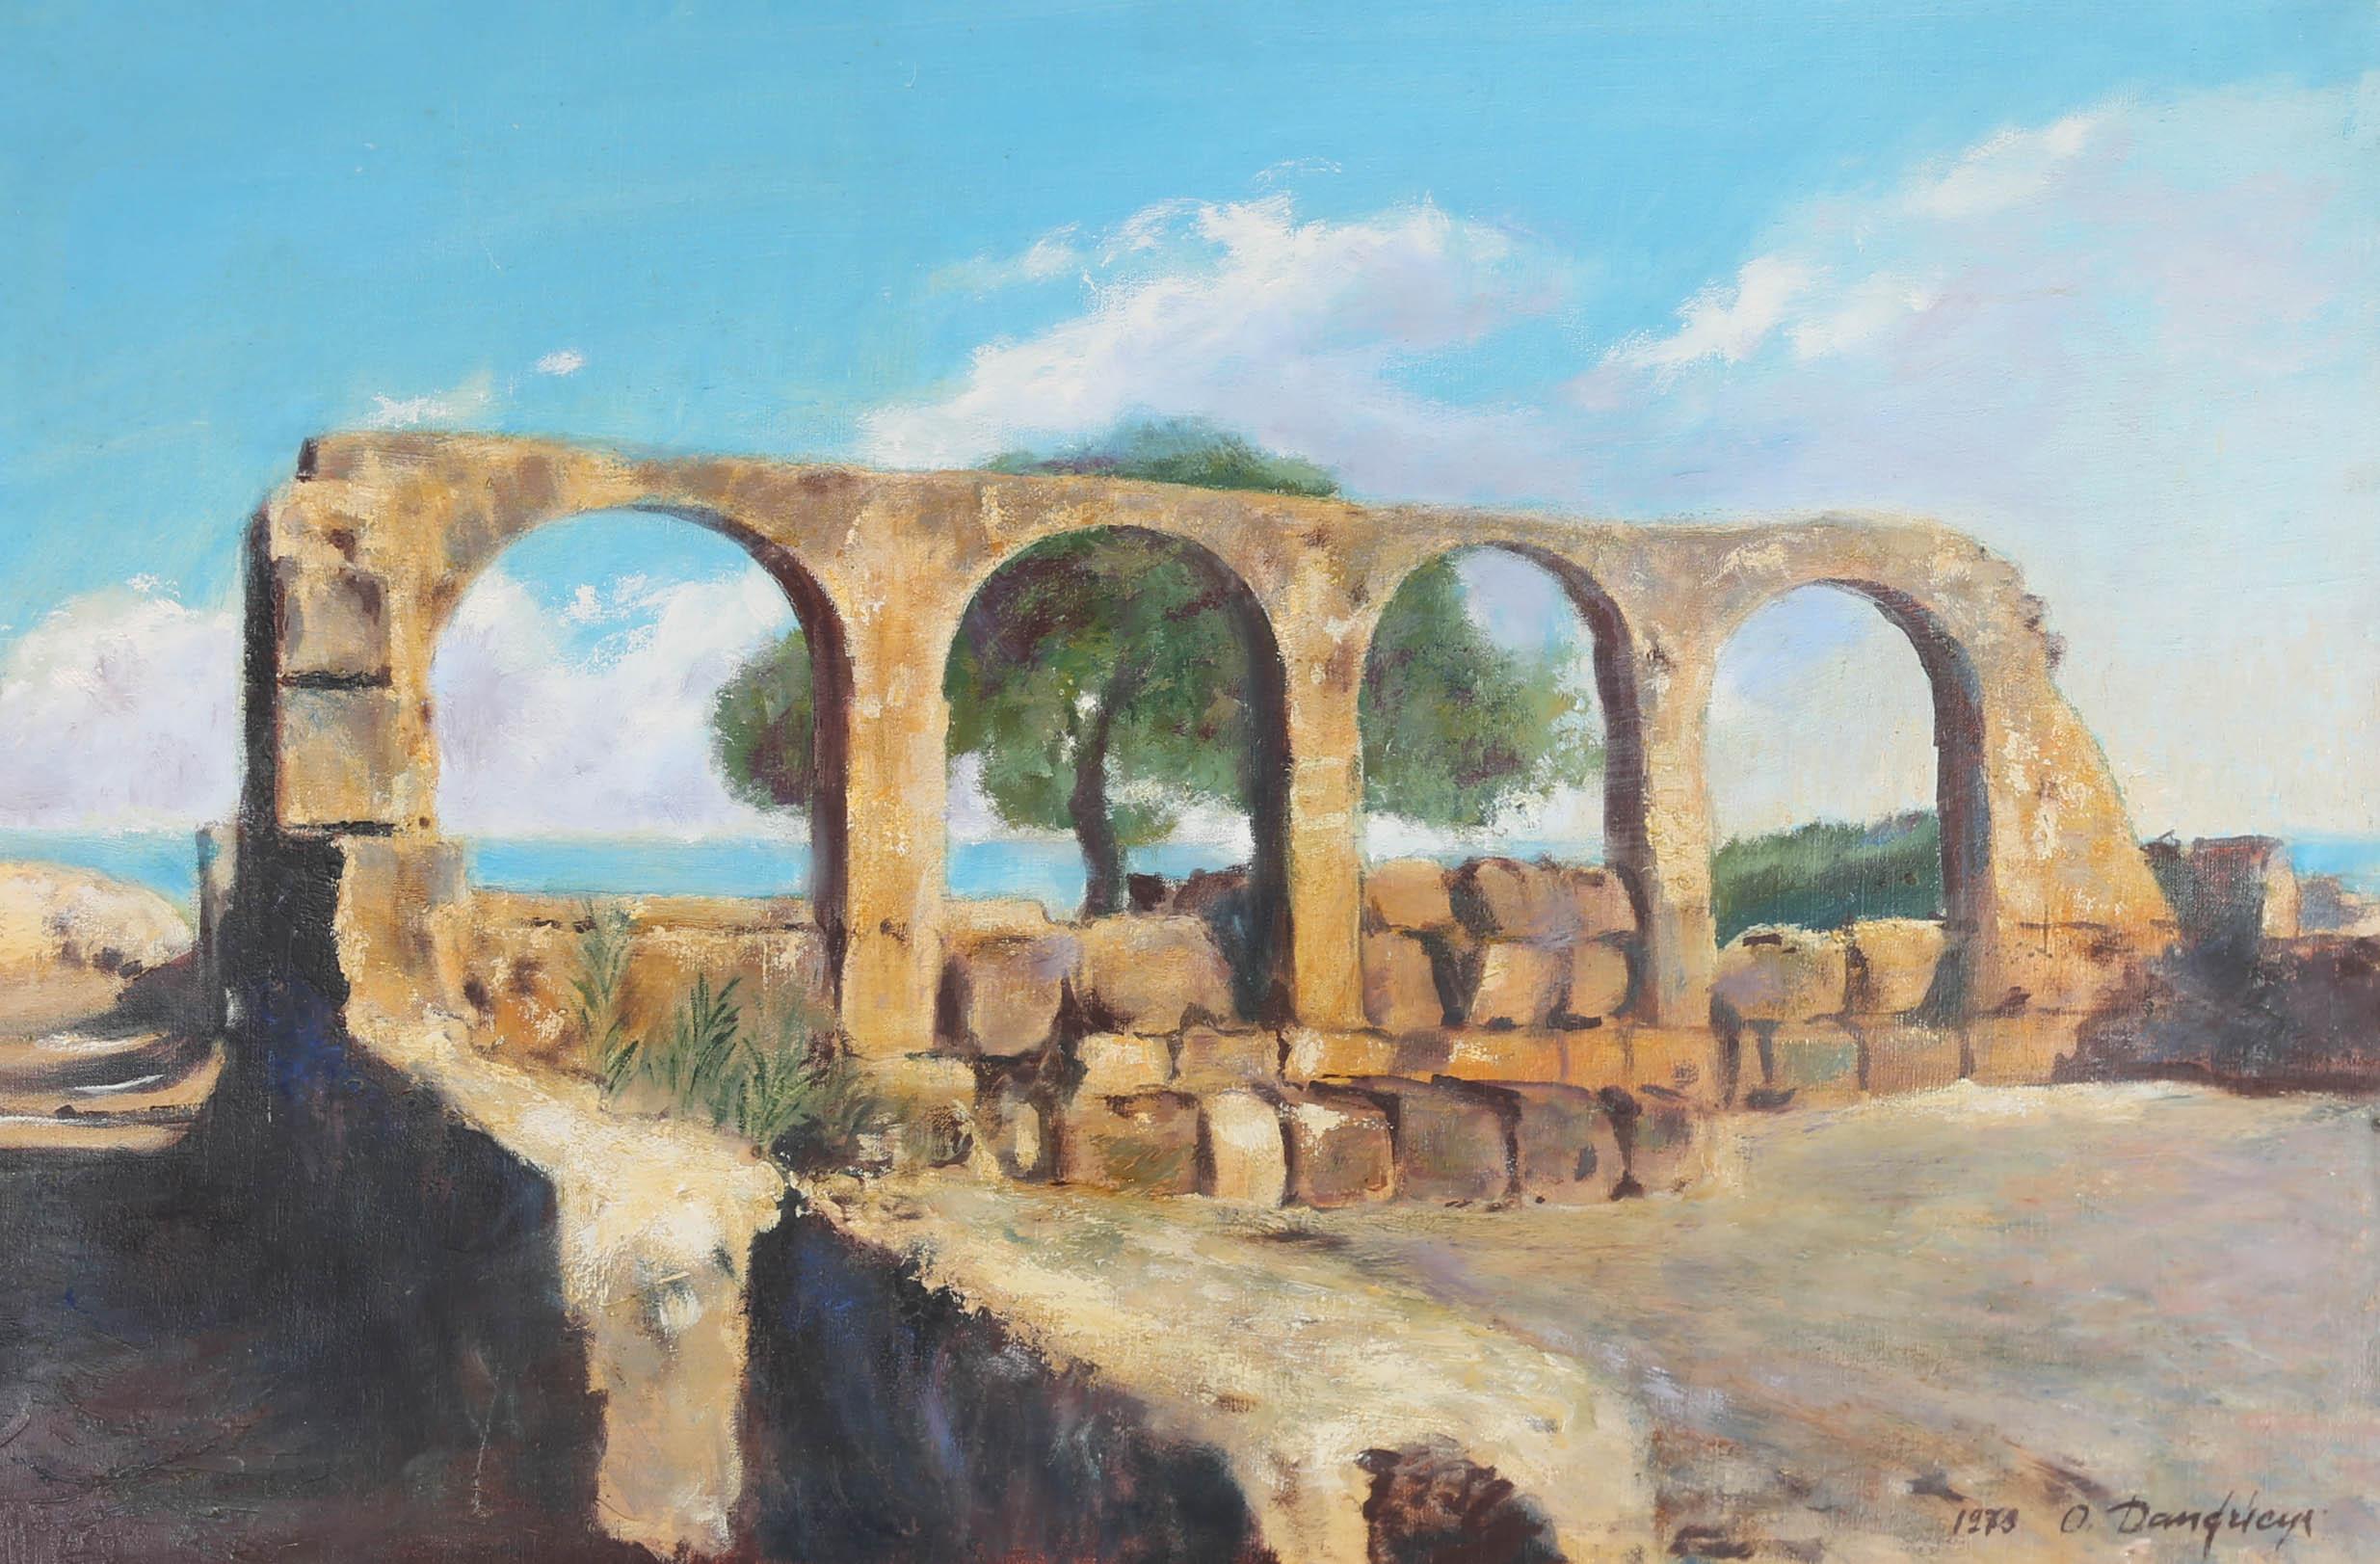 This charming oil study depicts arched ruins in a Mediterranean landscape before the bright blue sea. The artist uses an expressive technique, using gestural brushwork with areas of light impasto. Signed and dated to the lower right. On canvas.
